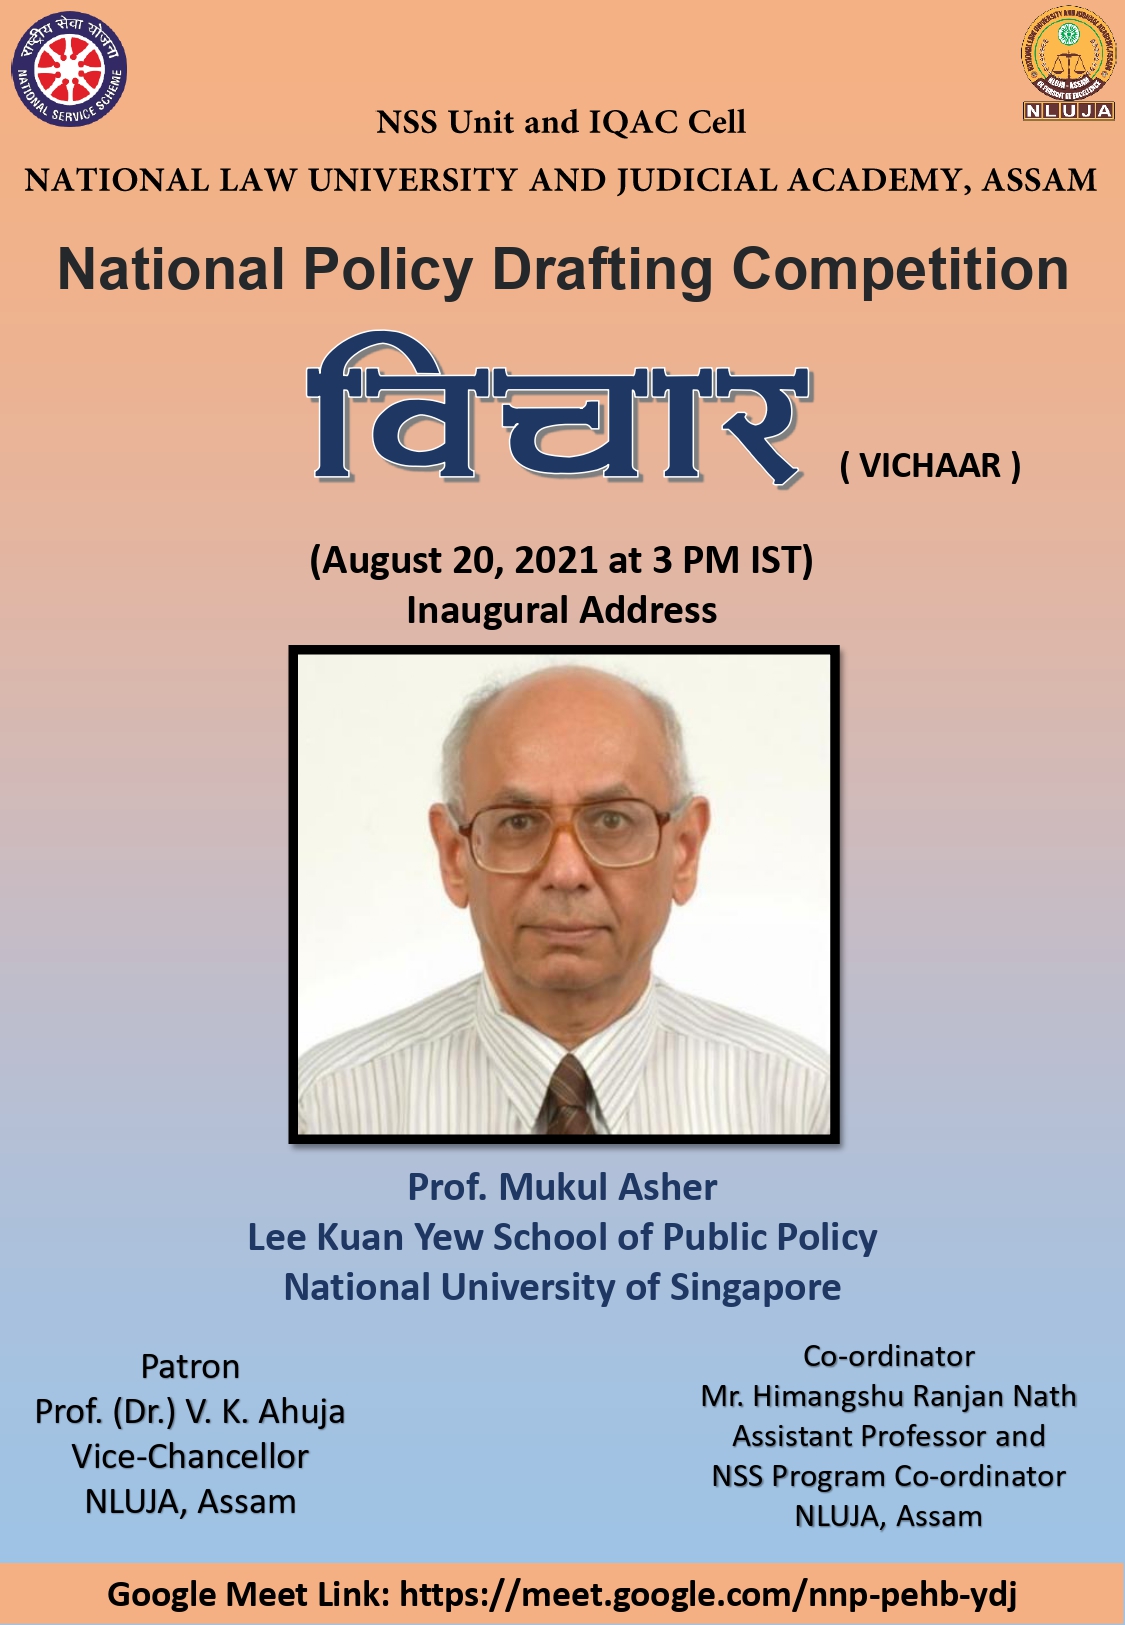 National Policy Drafting Competition- विचार (VICHAAR) by NLU Assam in collaboration with the Internal Quality Assurance Cell of the University